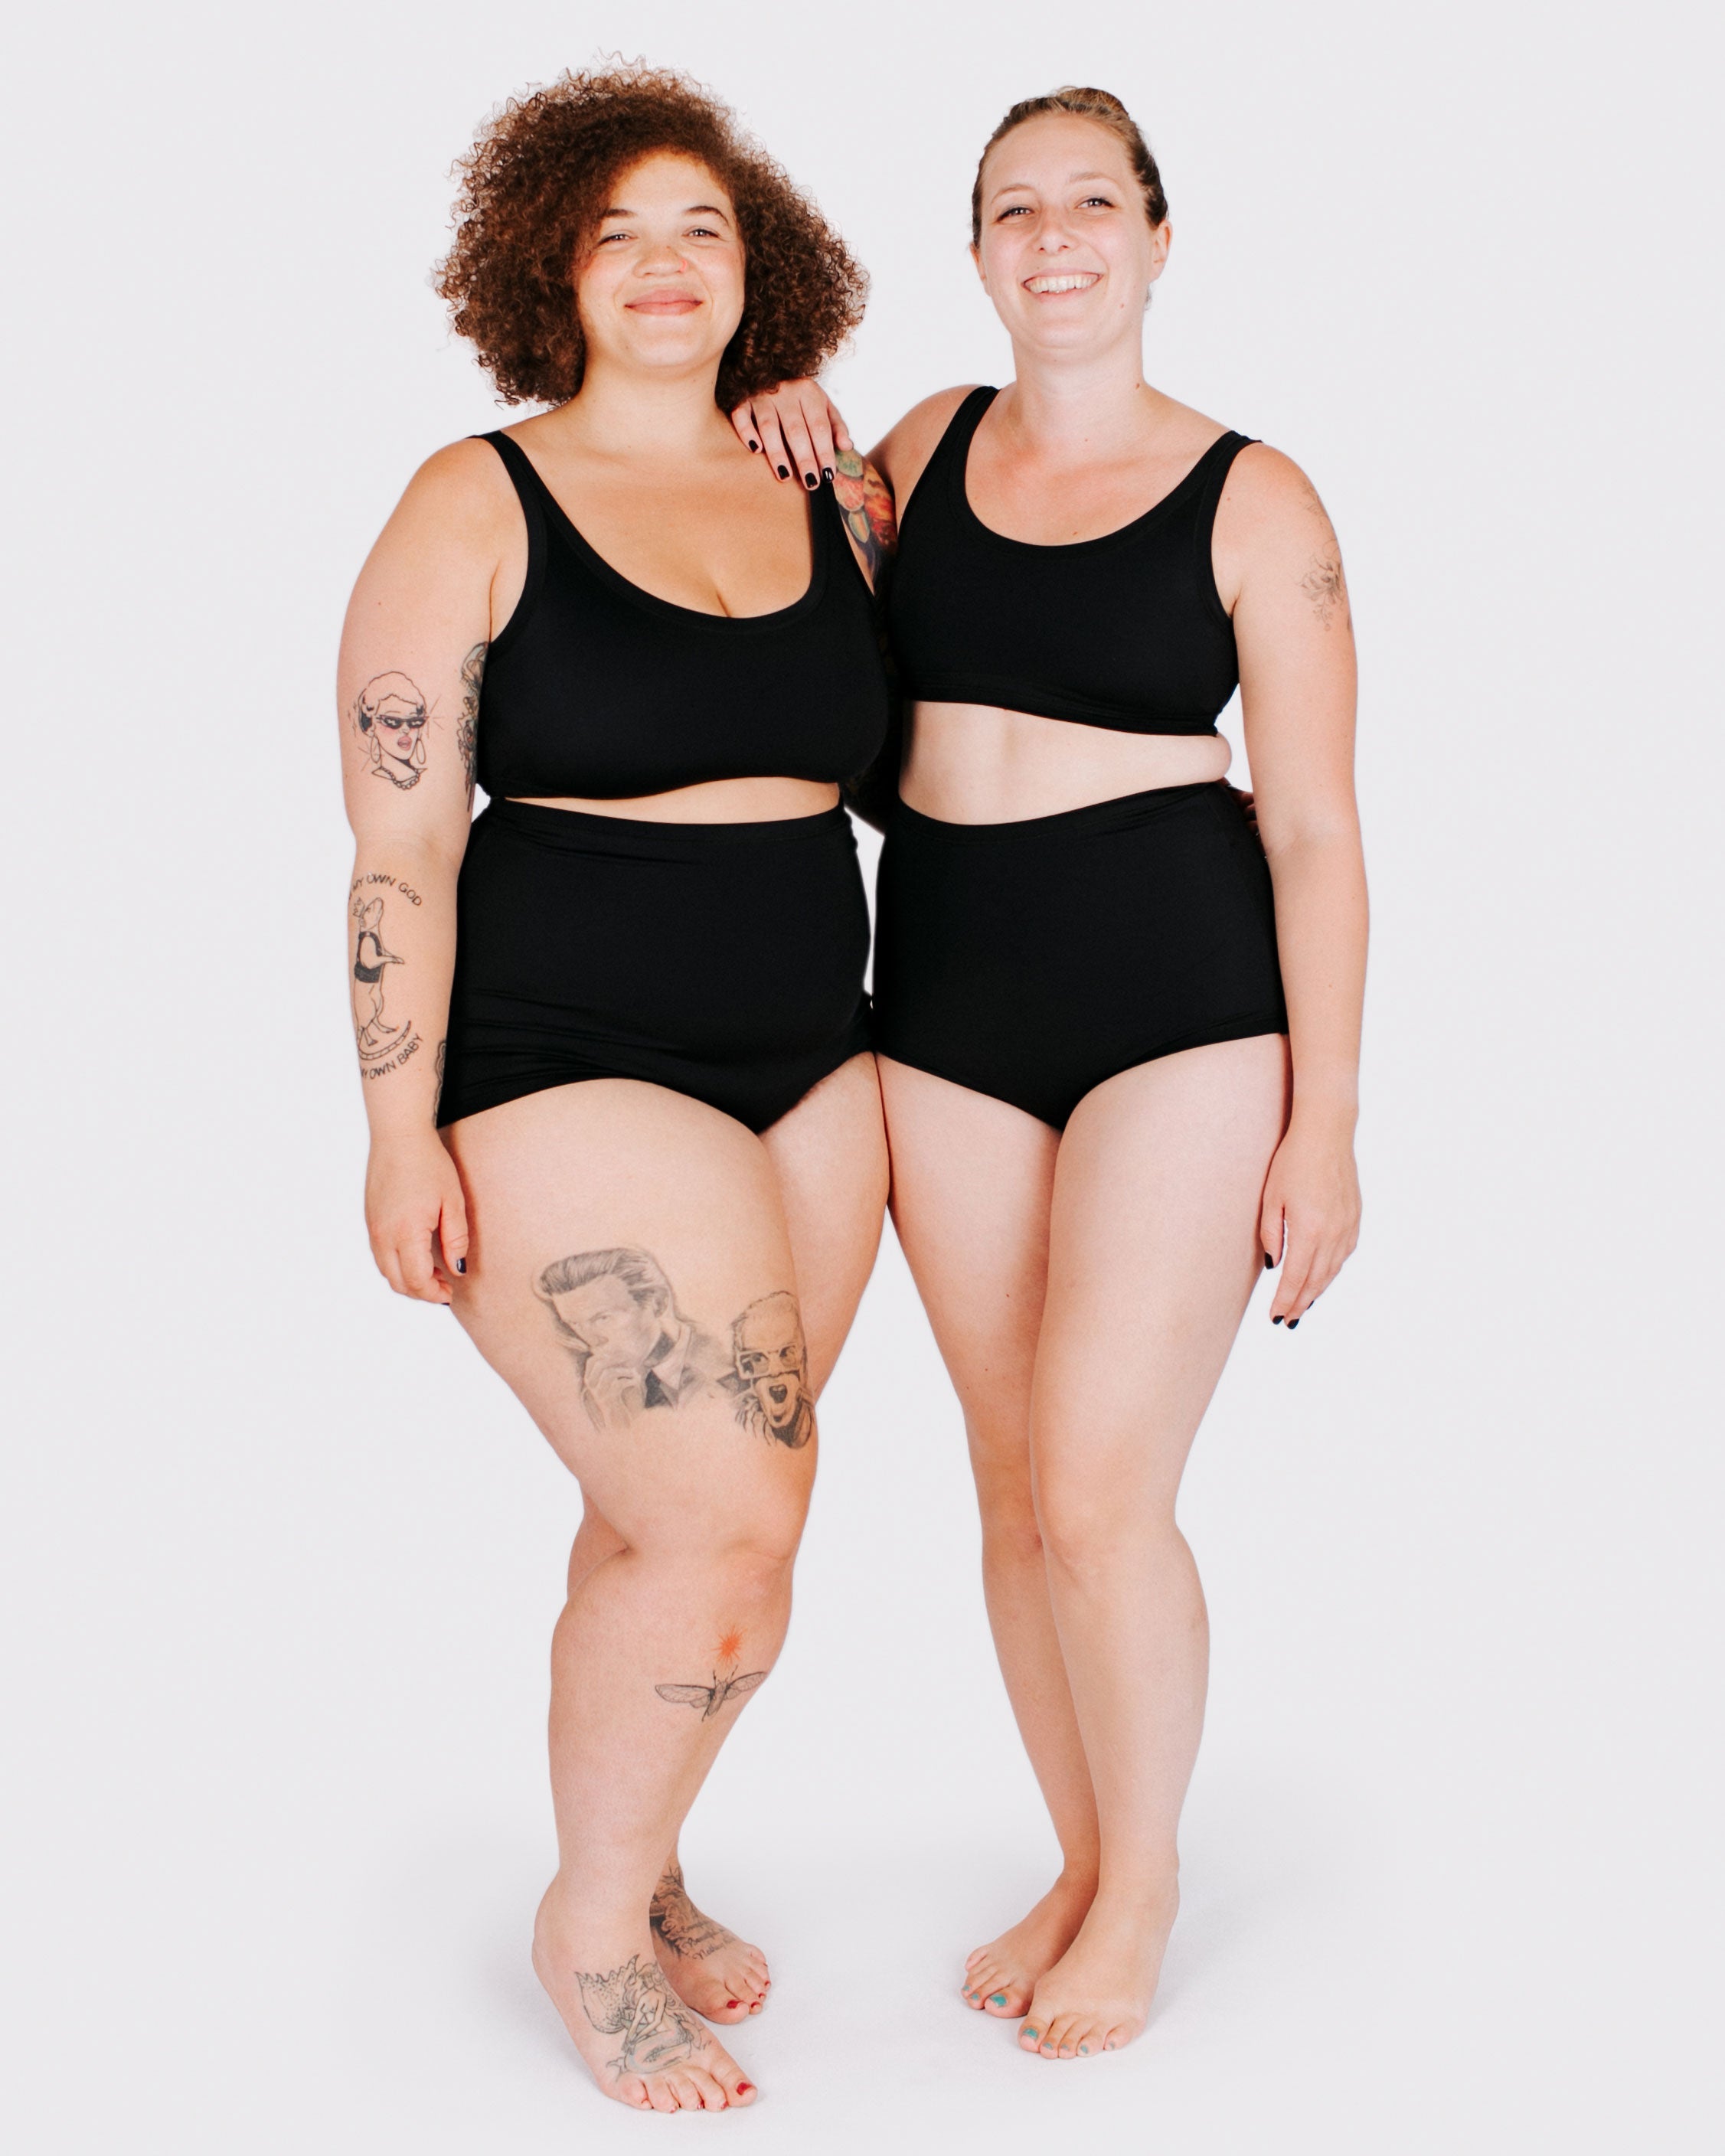 Fit photo from the front of Thunderpants recycled nylon Swimwear Sky Rise style bottoms and Swimwear Top in Plain Black on two models standing together.